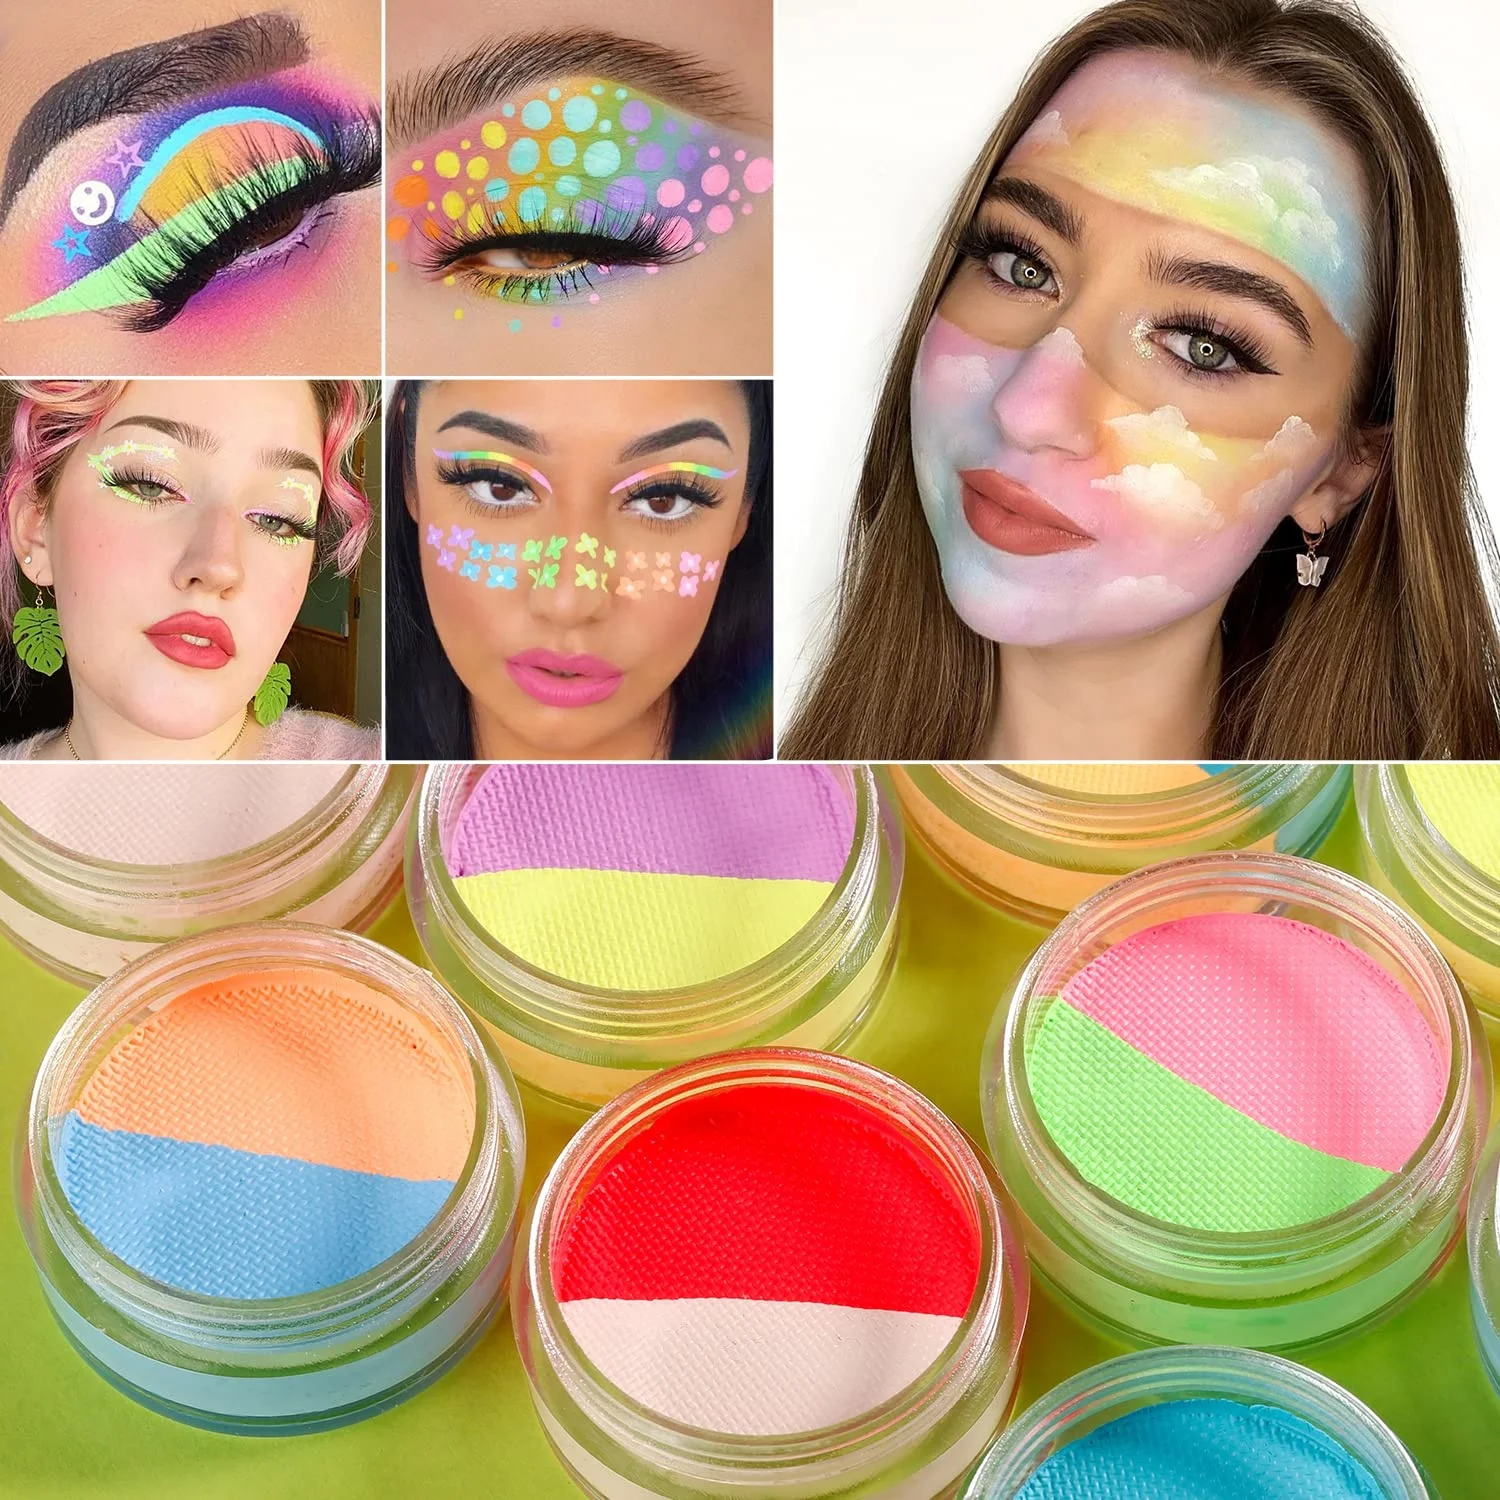 10G Water Activated Eyeliner UV Glow Neon Cake Body Face Makeup Paint for Costume Halloween and Club Makeup Art Paint (1600522259709)